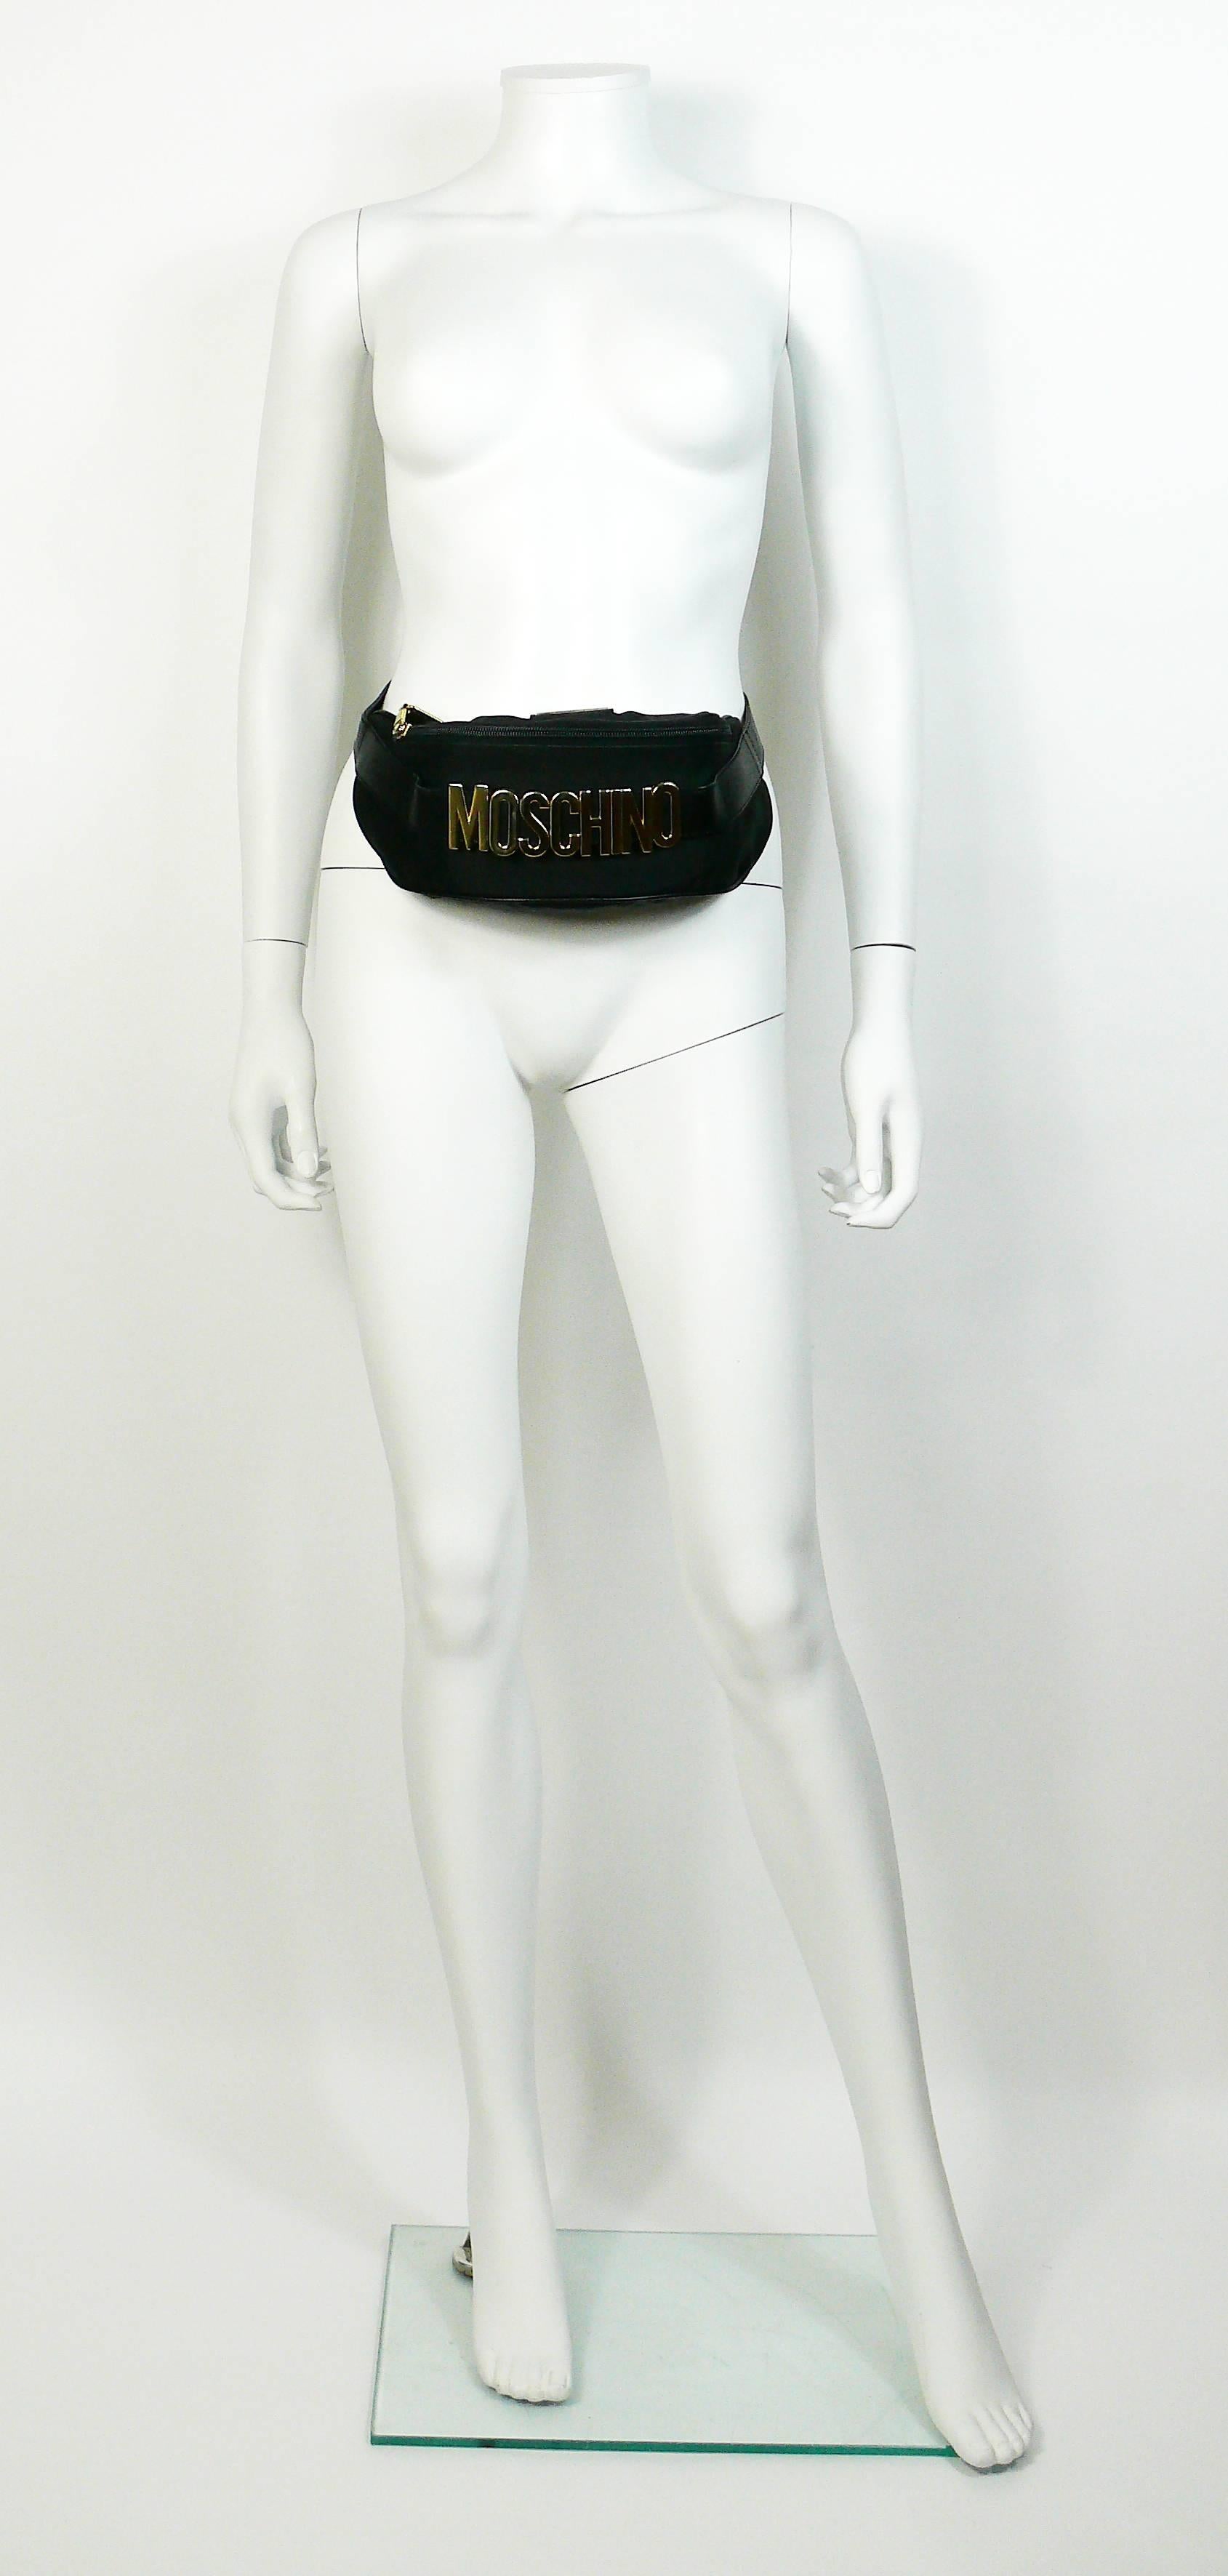 MOSCHINO by REDWALL vintage black fanny pack.

Thick nylon with leather strap and gold tone hardware.

One size fits all.
Adjustable leather straps.

Embossed Centropercento MOSCHINO Redwall Made in Italy.
Numbered model 461002.
Redwall logo